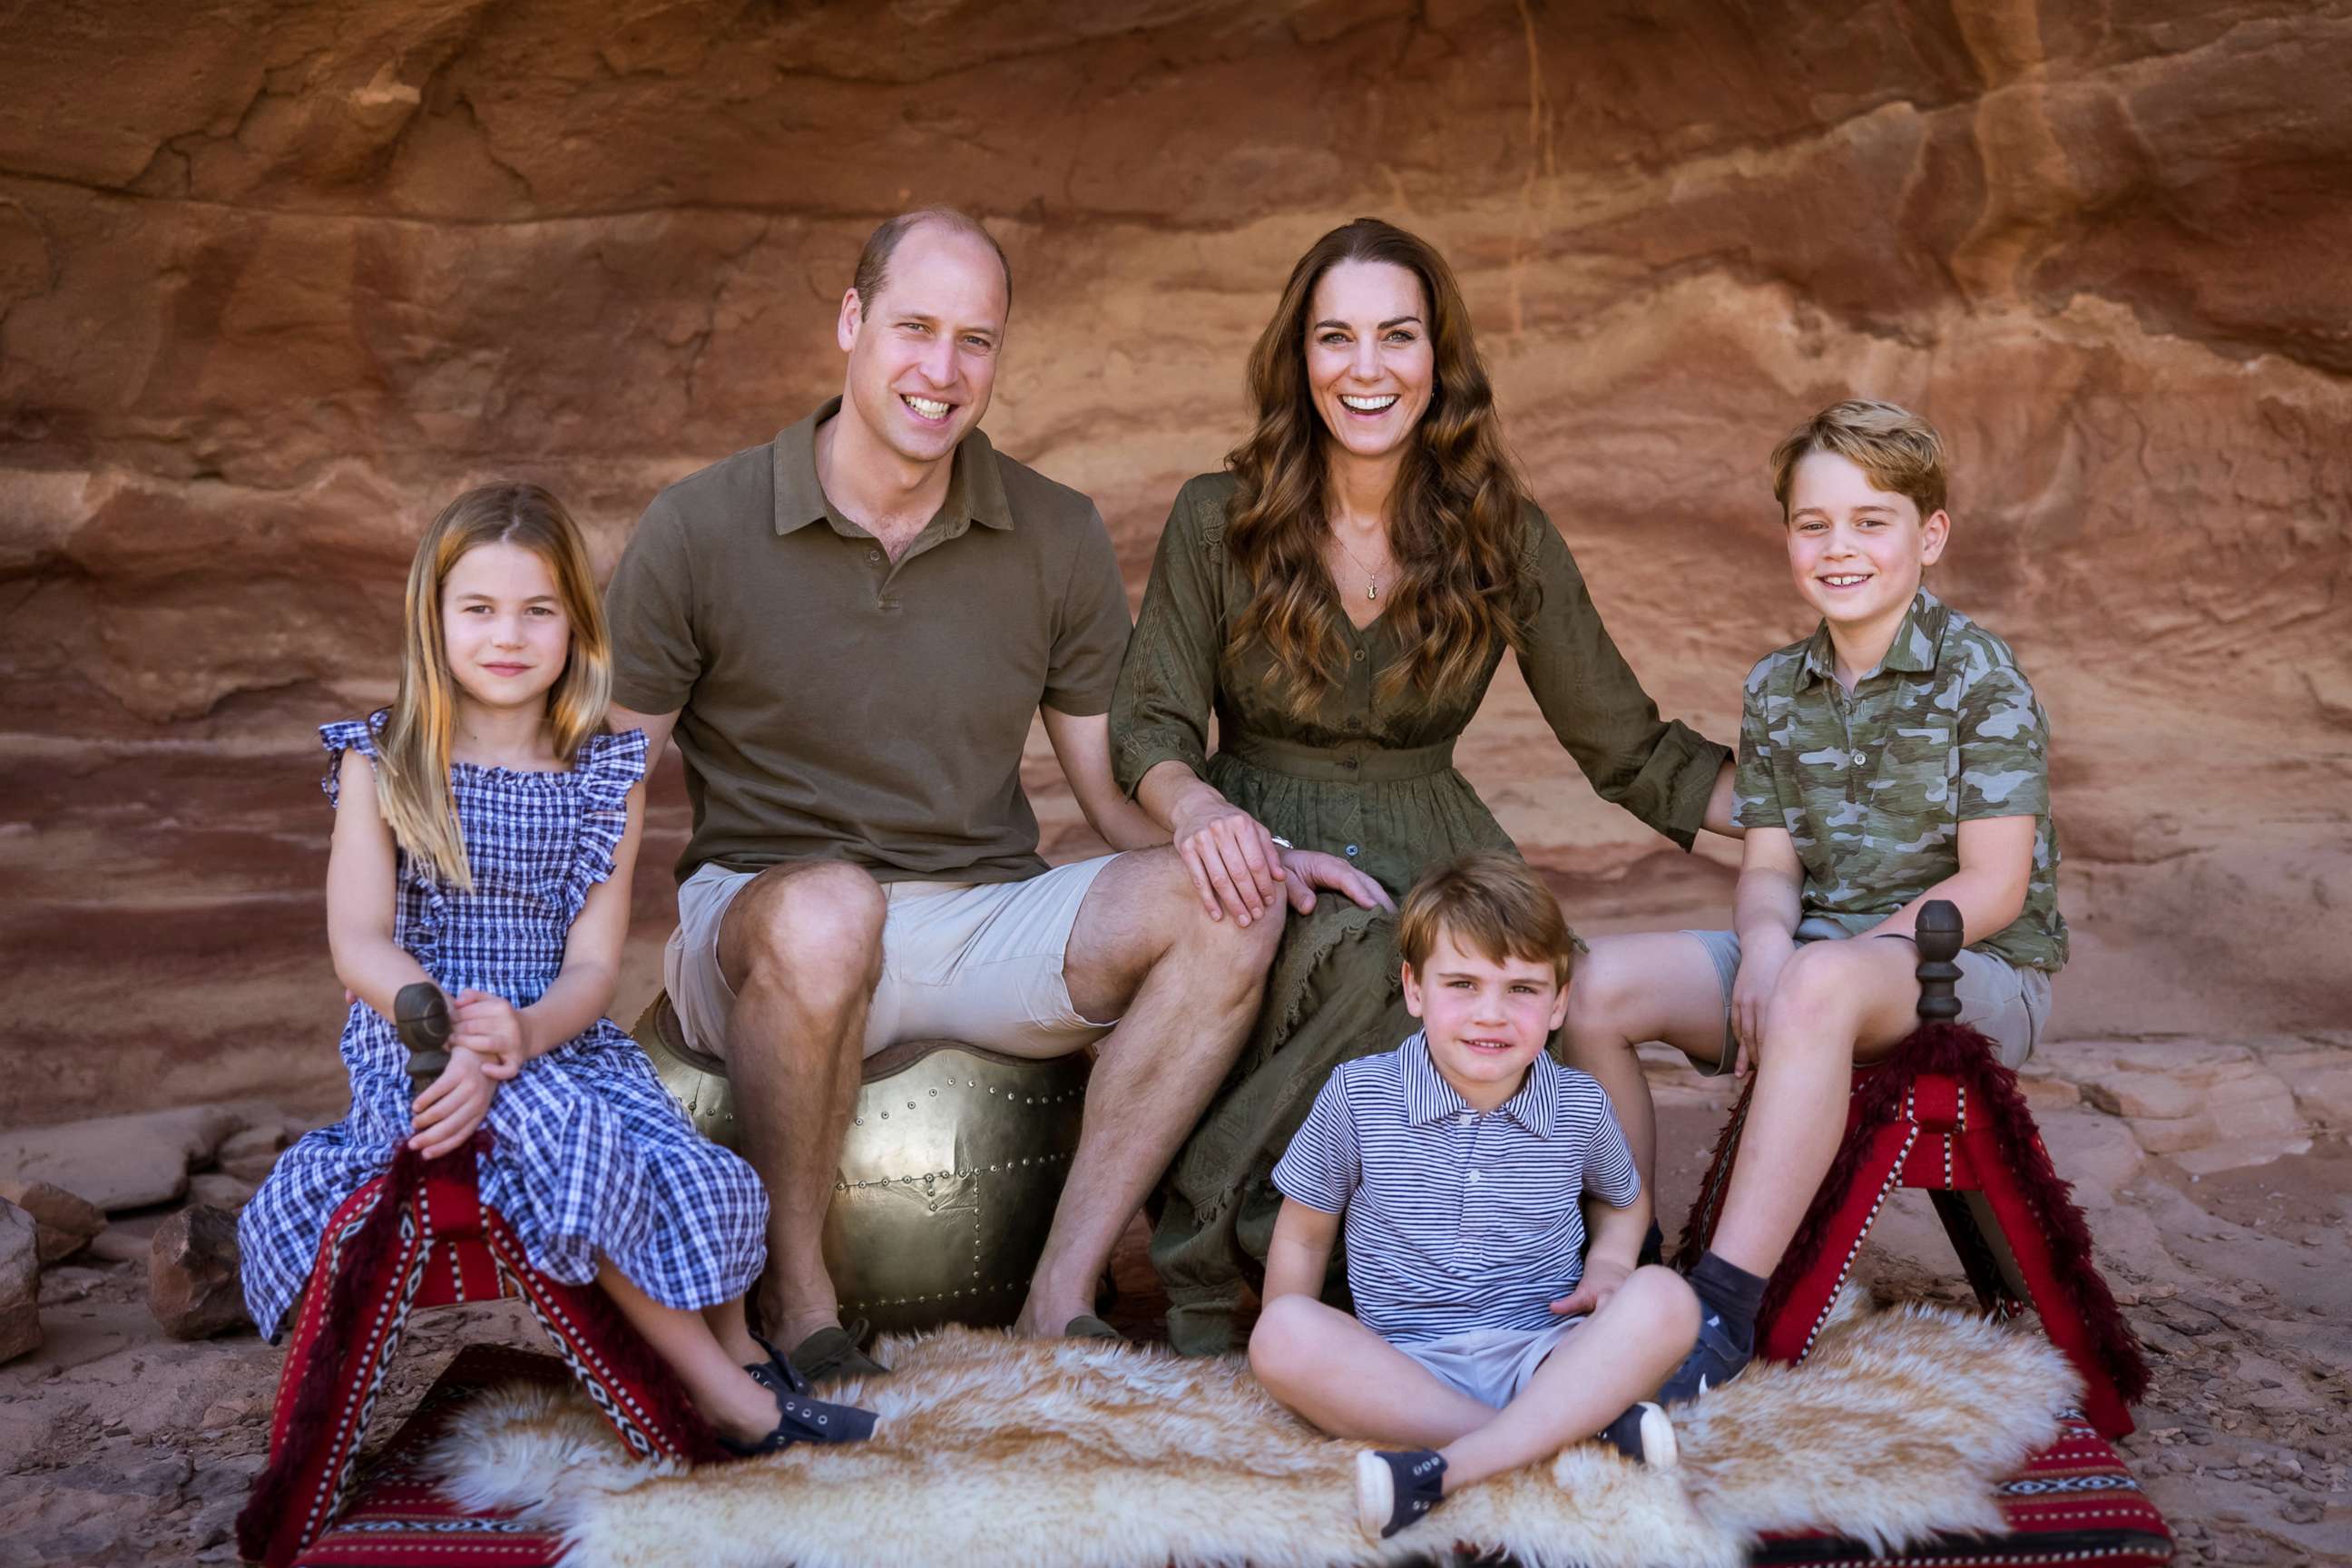 PHOTO: A photographshows Britain's PrinceWilliam, Duke of Cambridge and Catherine, Duchess of Cambridge, with their three children Princess Charlotte, Prince Louis and Prince George, right, in Jordan earlier this year.